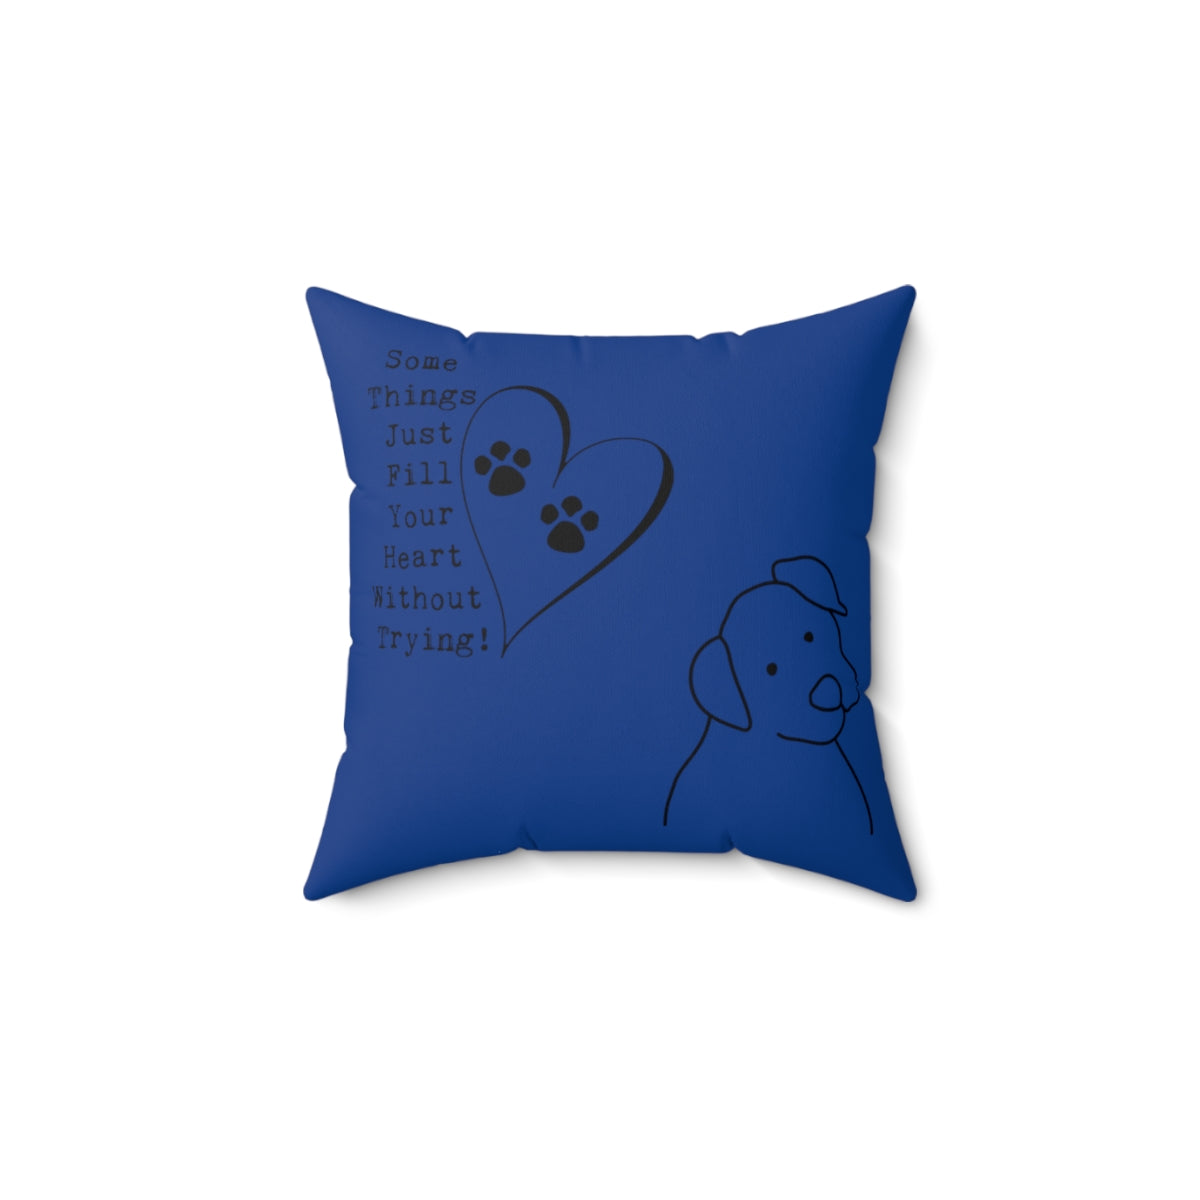 Blue Square Pillow Case - Some Things Fill Your Heart Without Trying - Home Decor Pillow Cover - Accent Pillow Cover